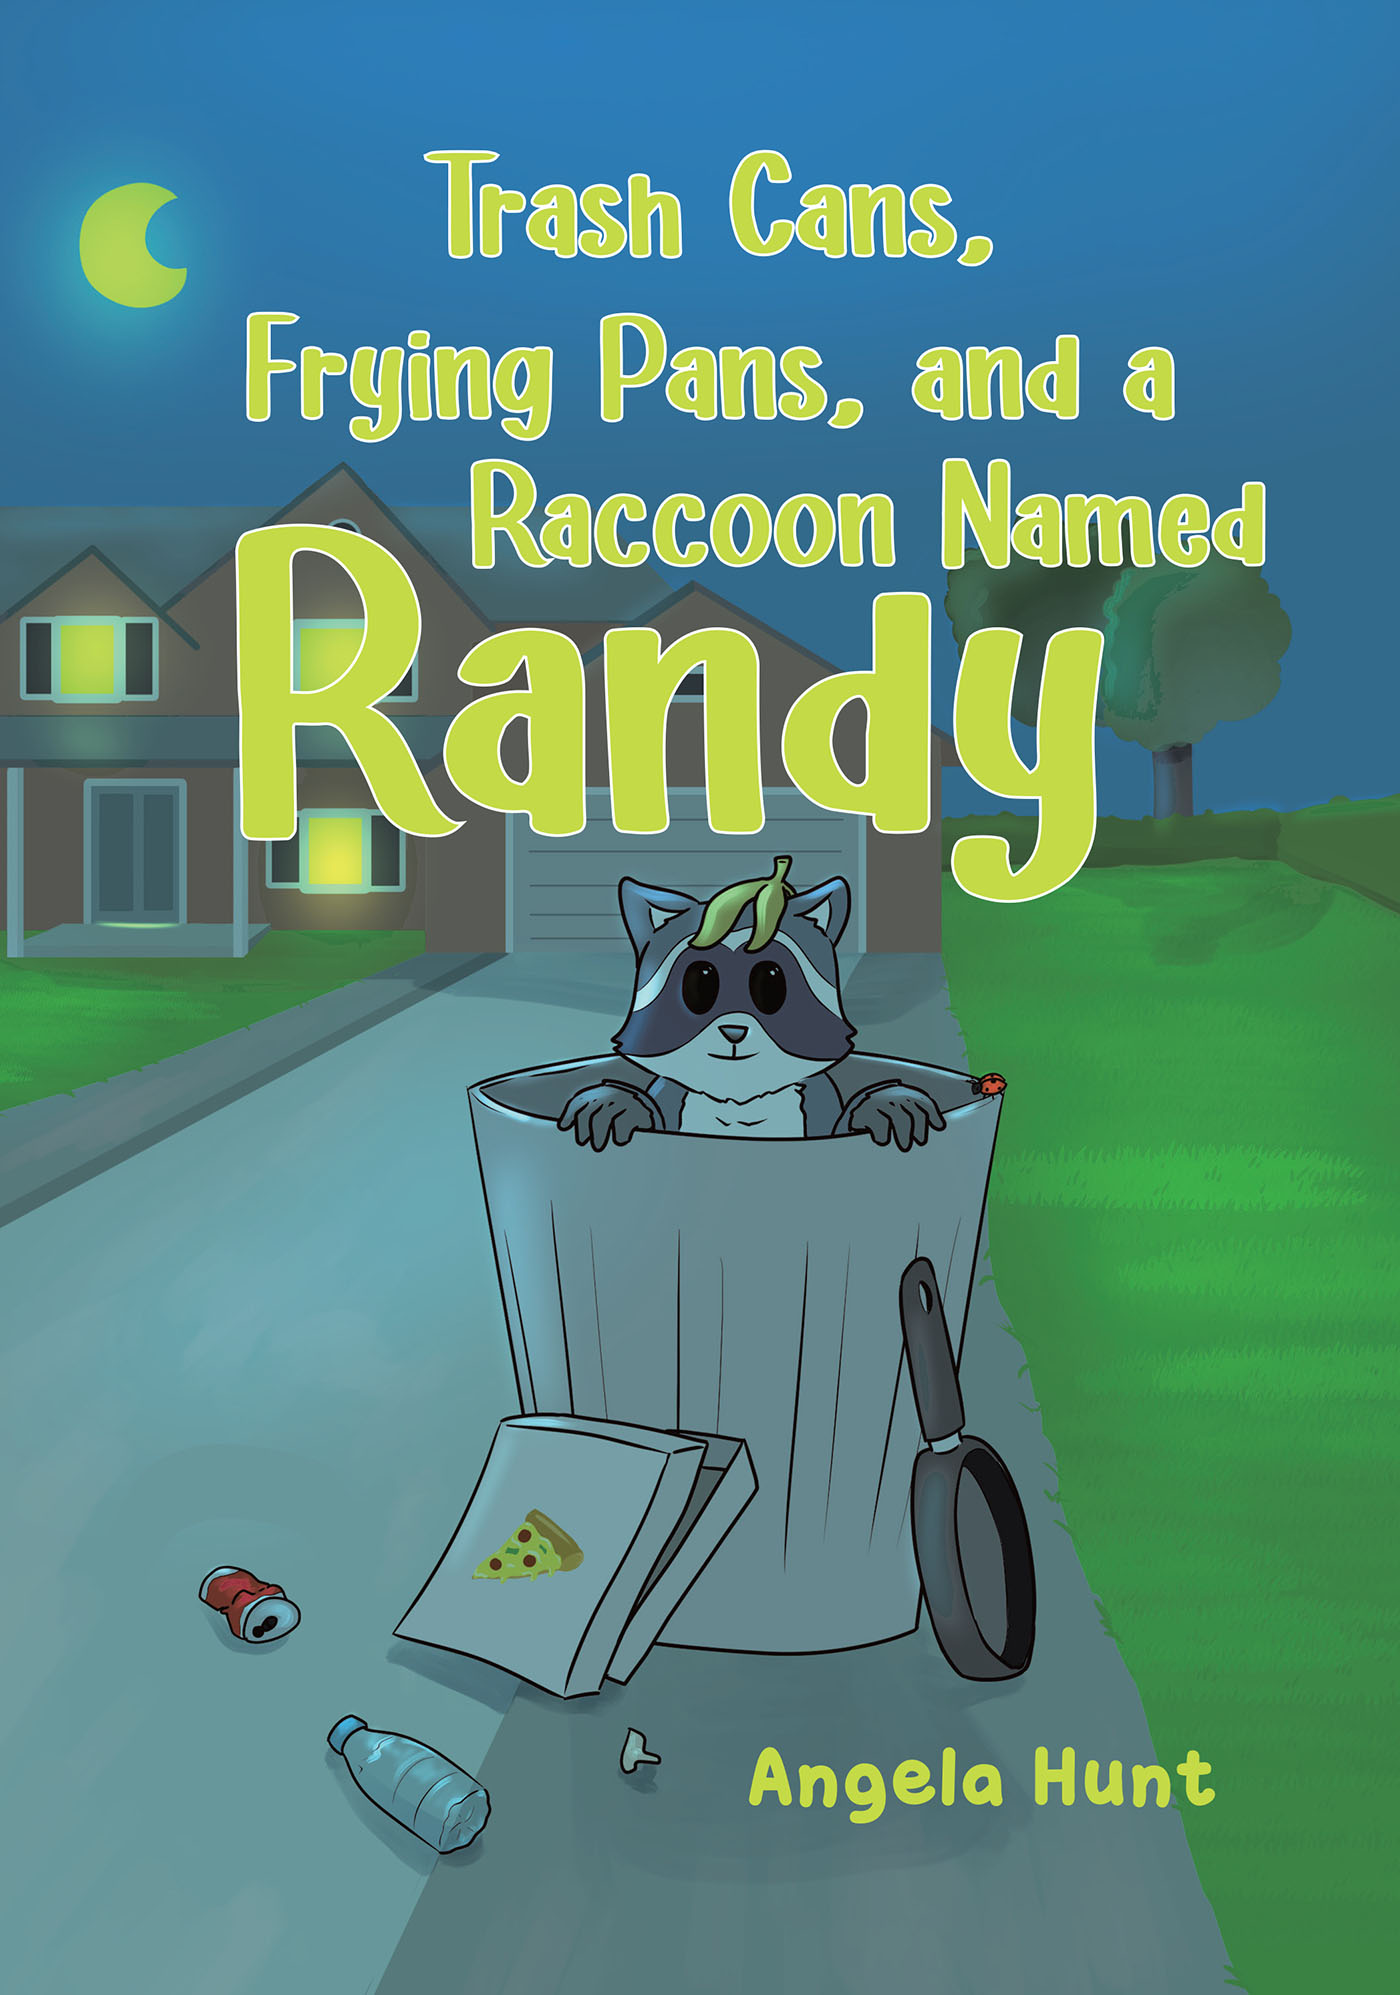 Author Angela Hunt’s New Book, "Trash Cans, Frying Pans, and a Raccoon Named Randy," Follows a Young Boy’s Investigation of Who Could be Going Through His Family’s Trash